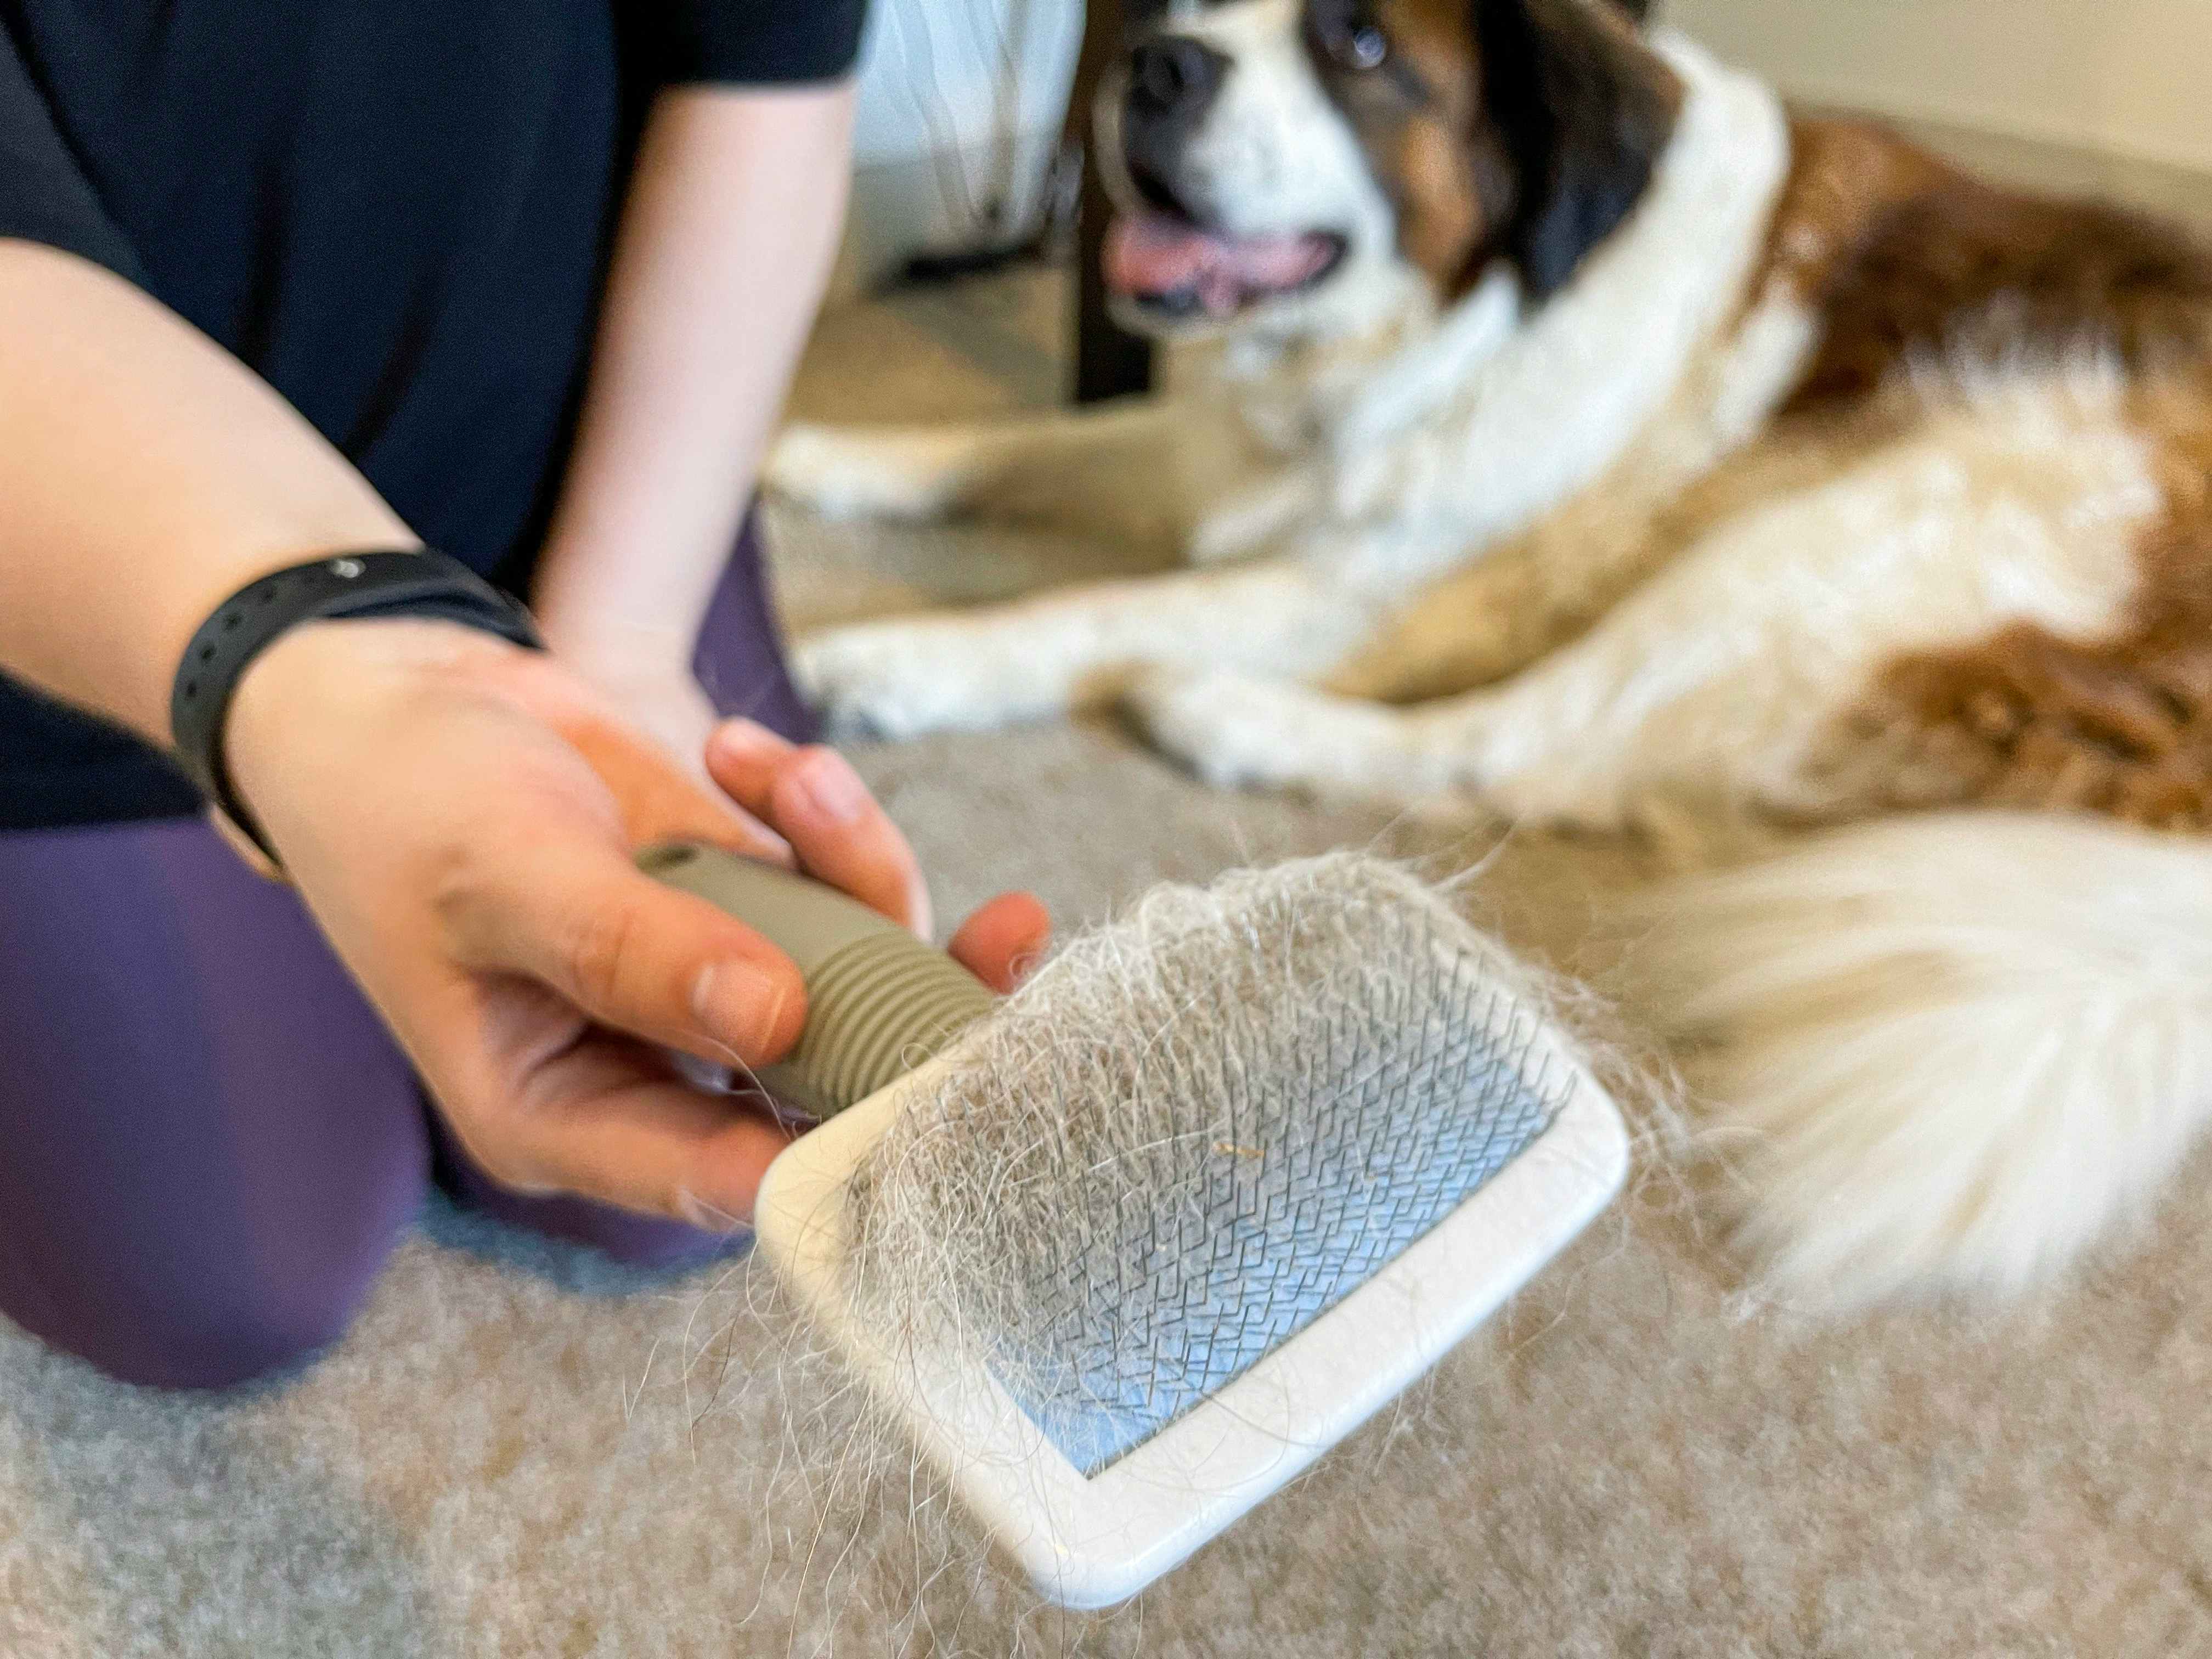 Never deal with hairy clothes again! Simply throw our laundry pet hair, laundry pet hair catcher